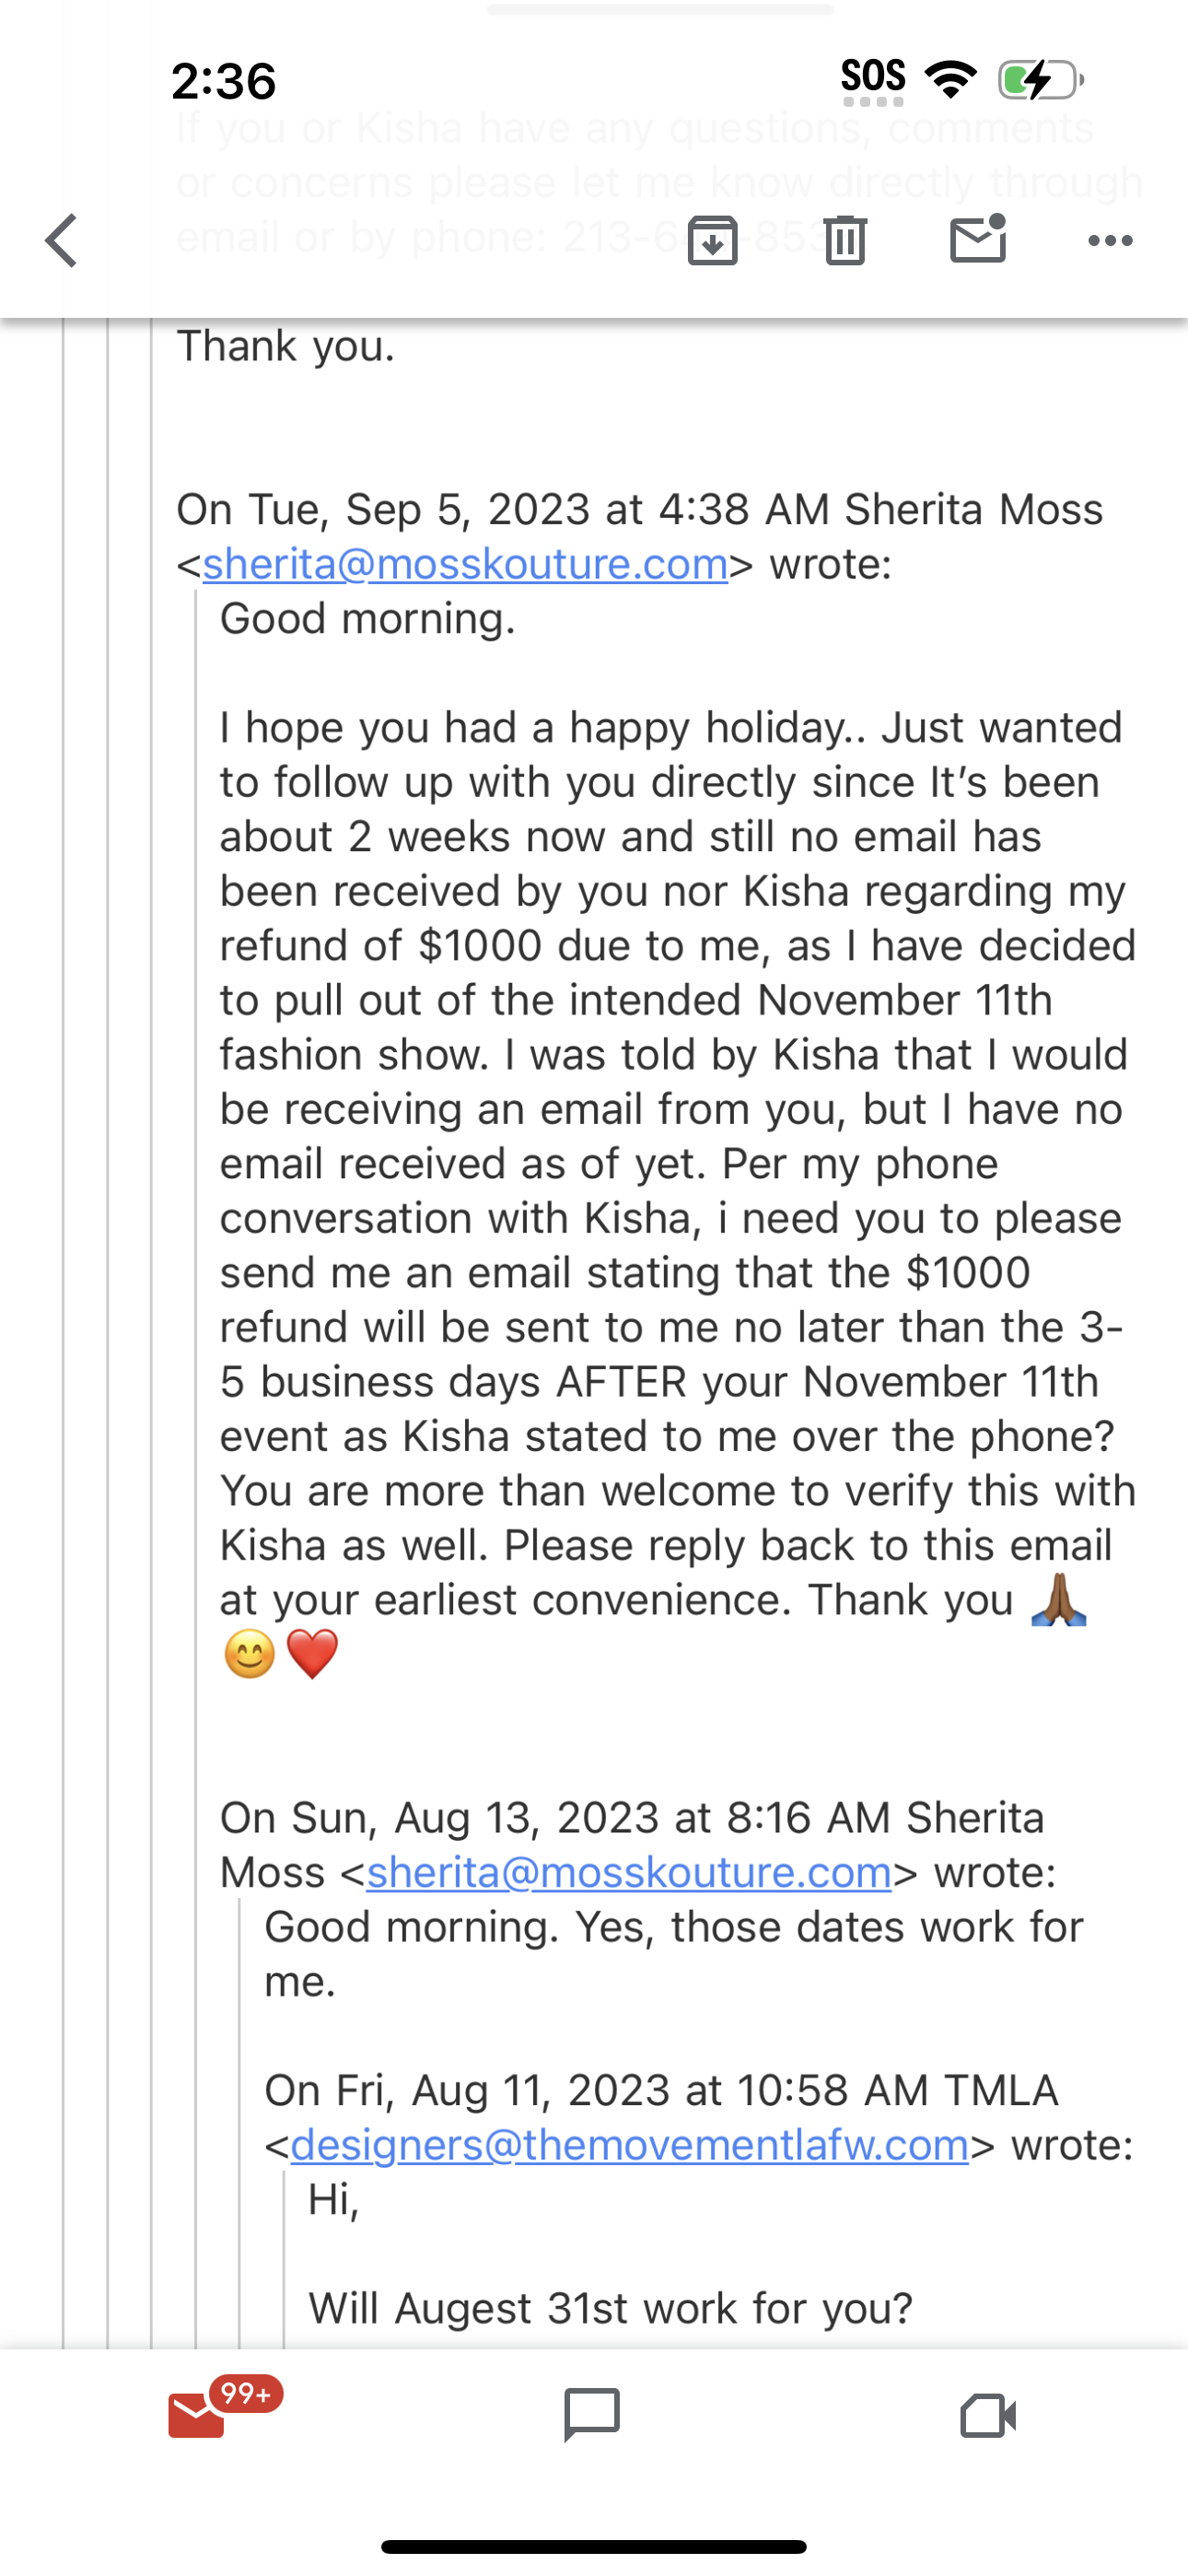 Emails i sent to Kisha and The Movement LAFW